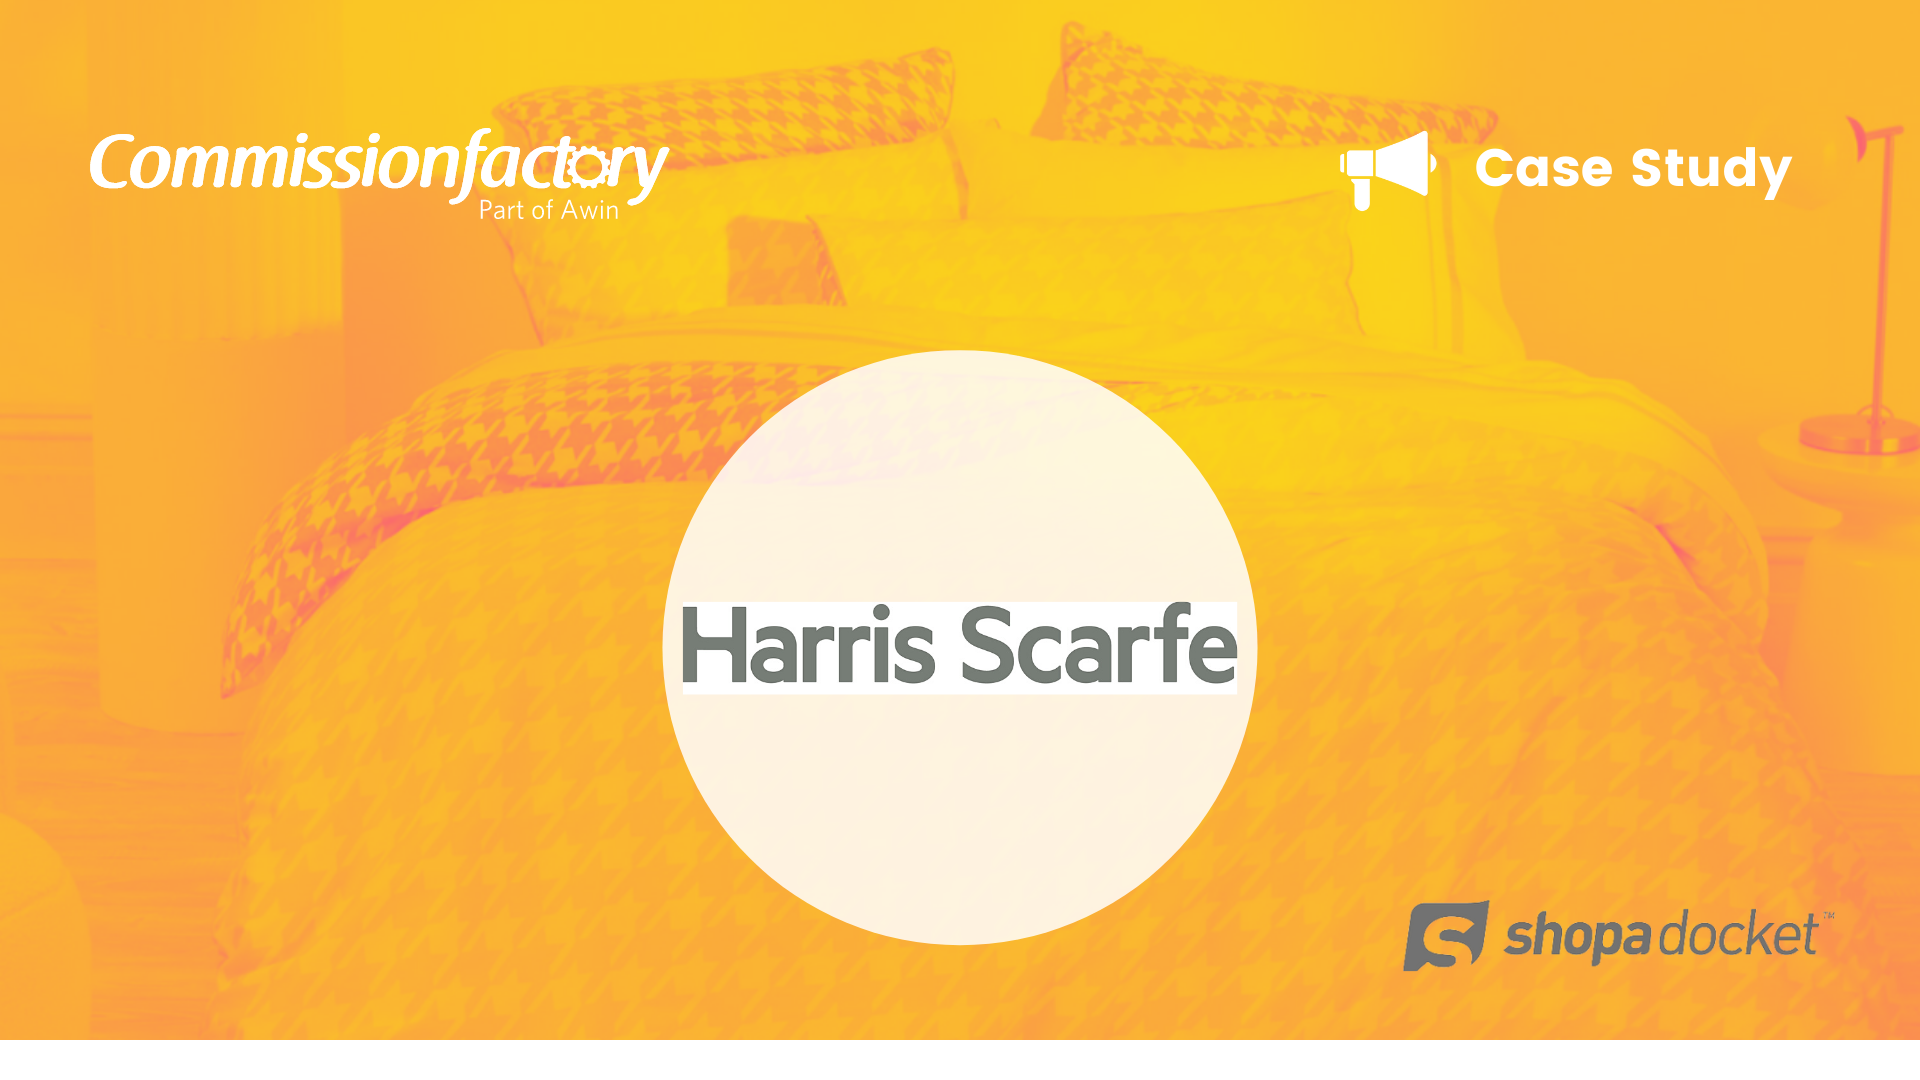 Harris Scarfe to close but customers want variety